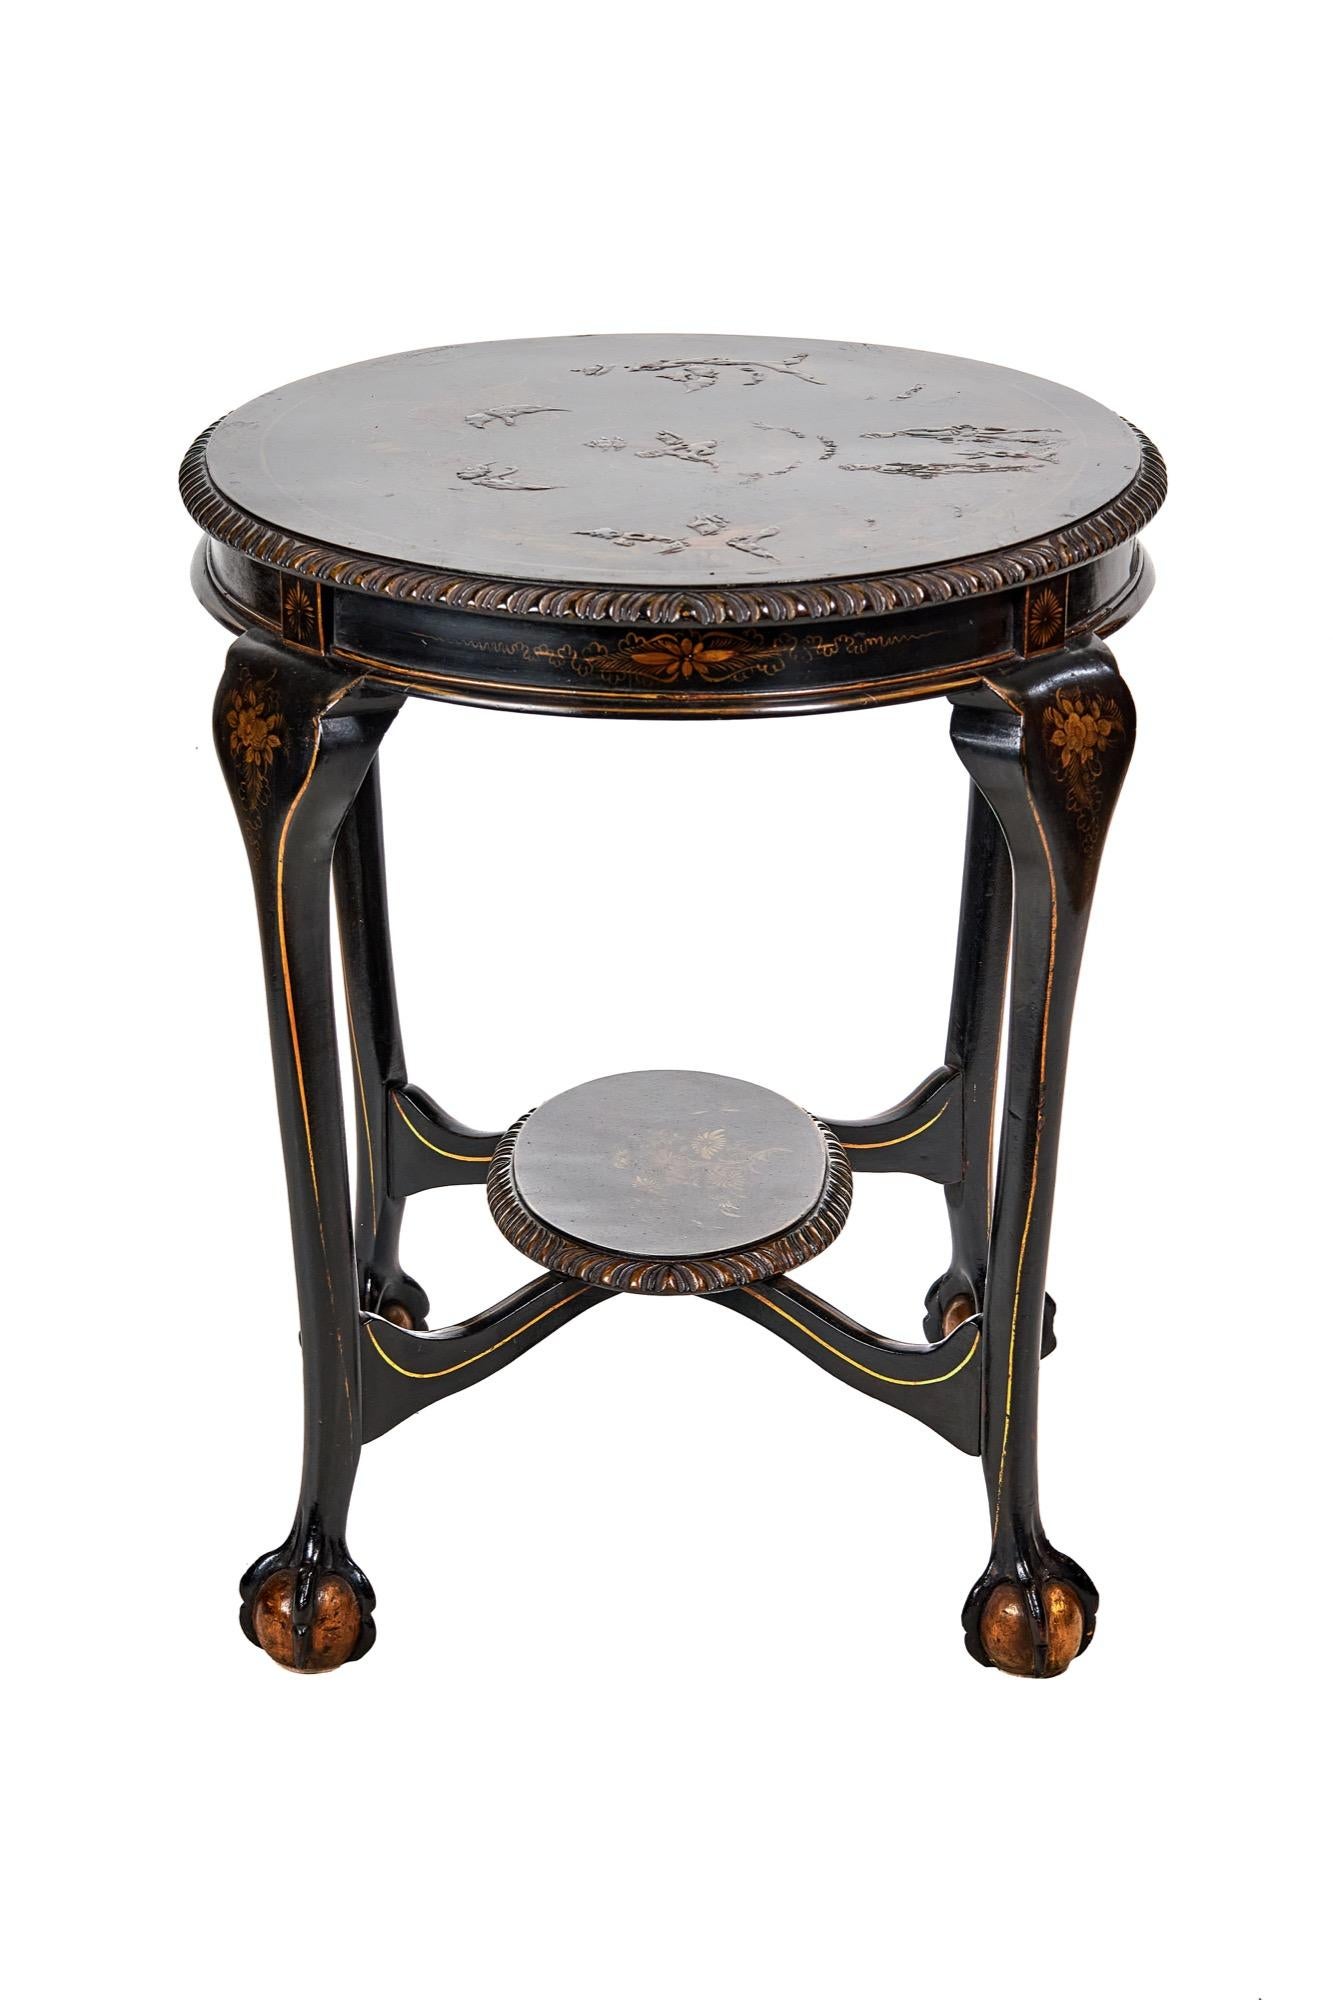 European chinoiserie Decorated Oval 2 Tier Table, circa 1900 For Sale